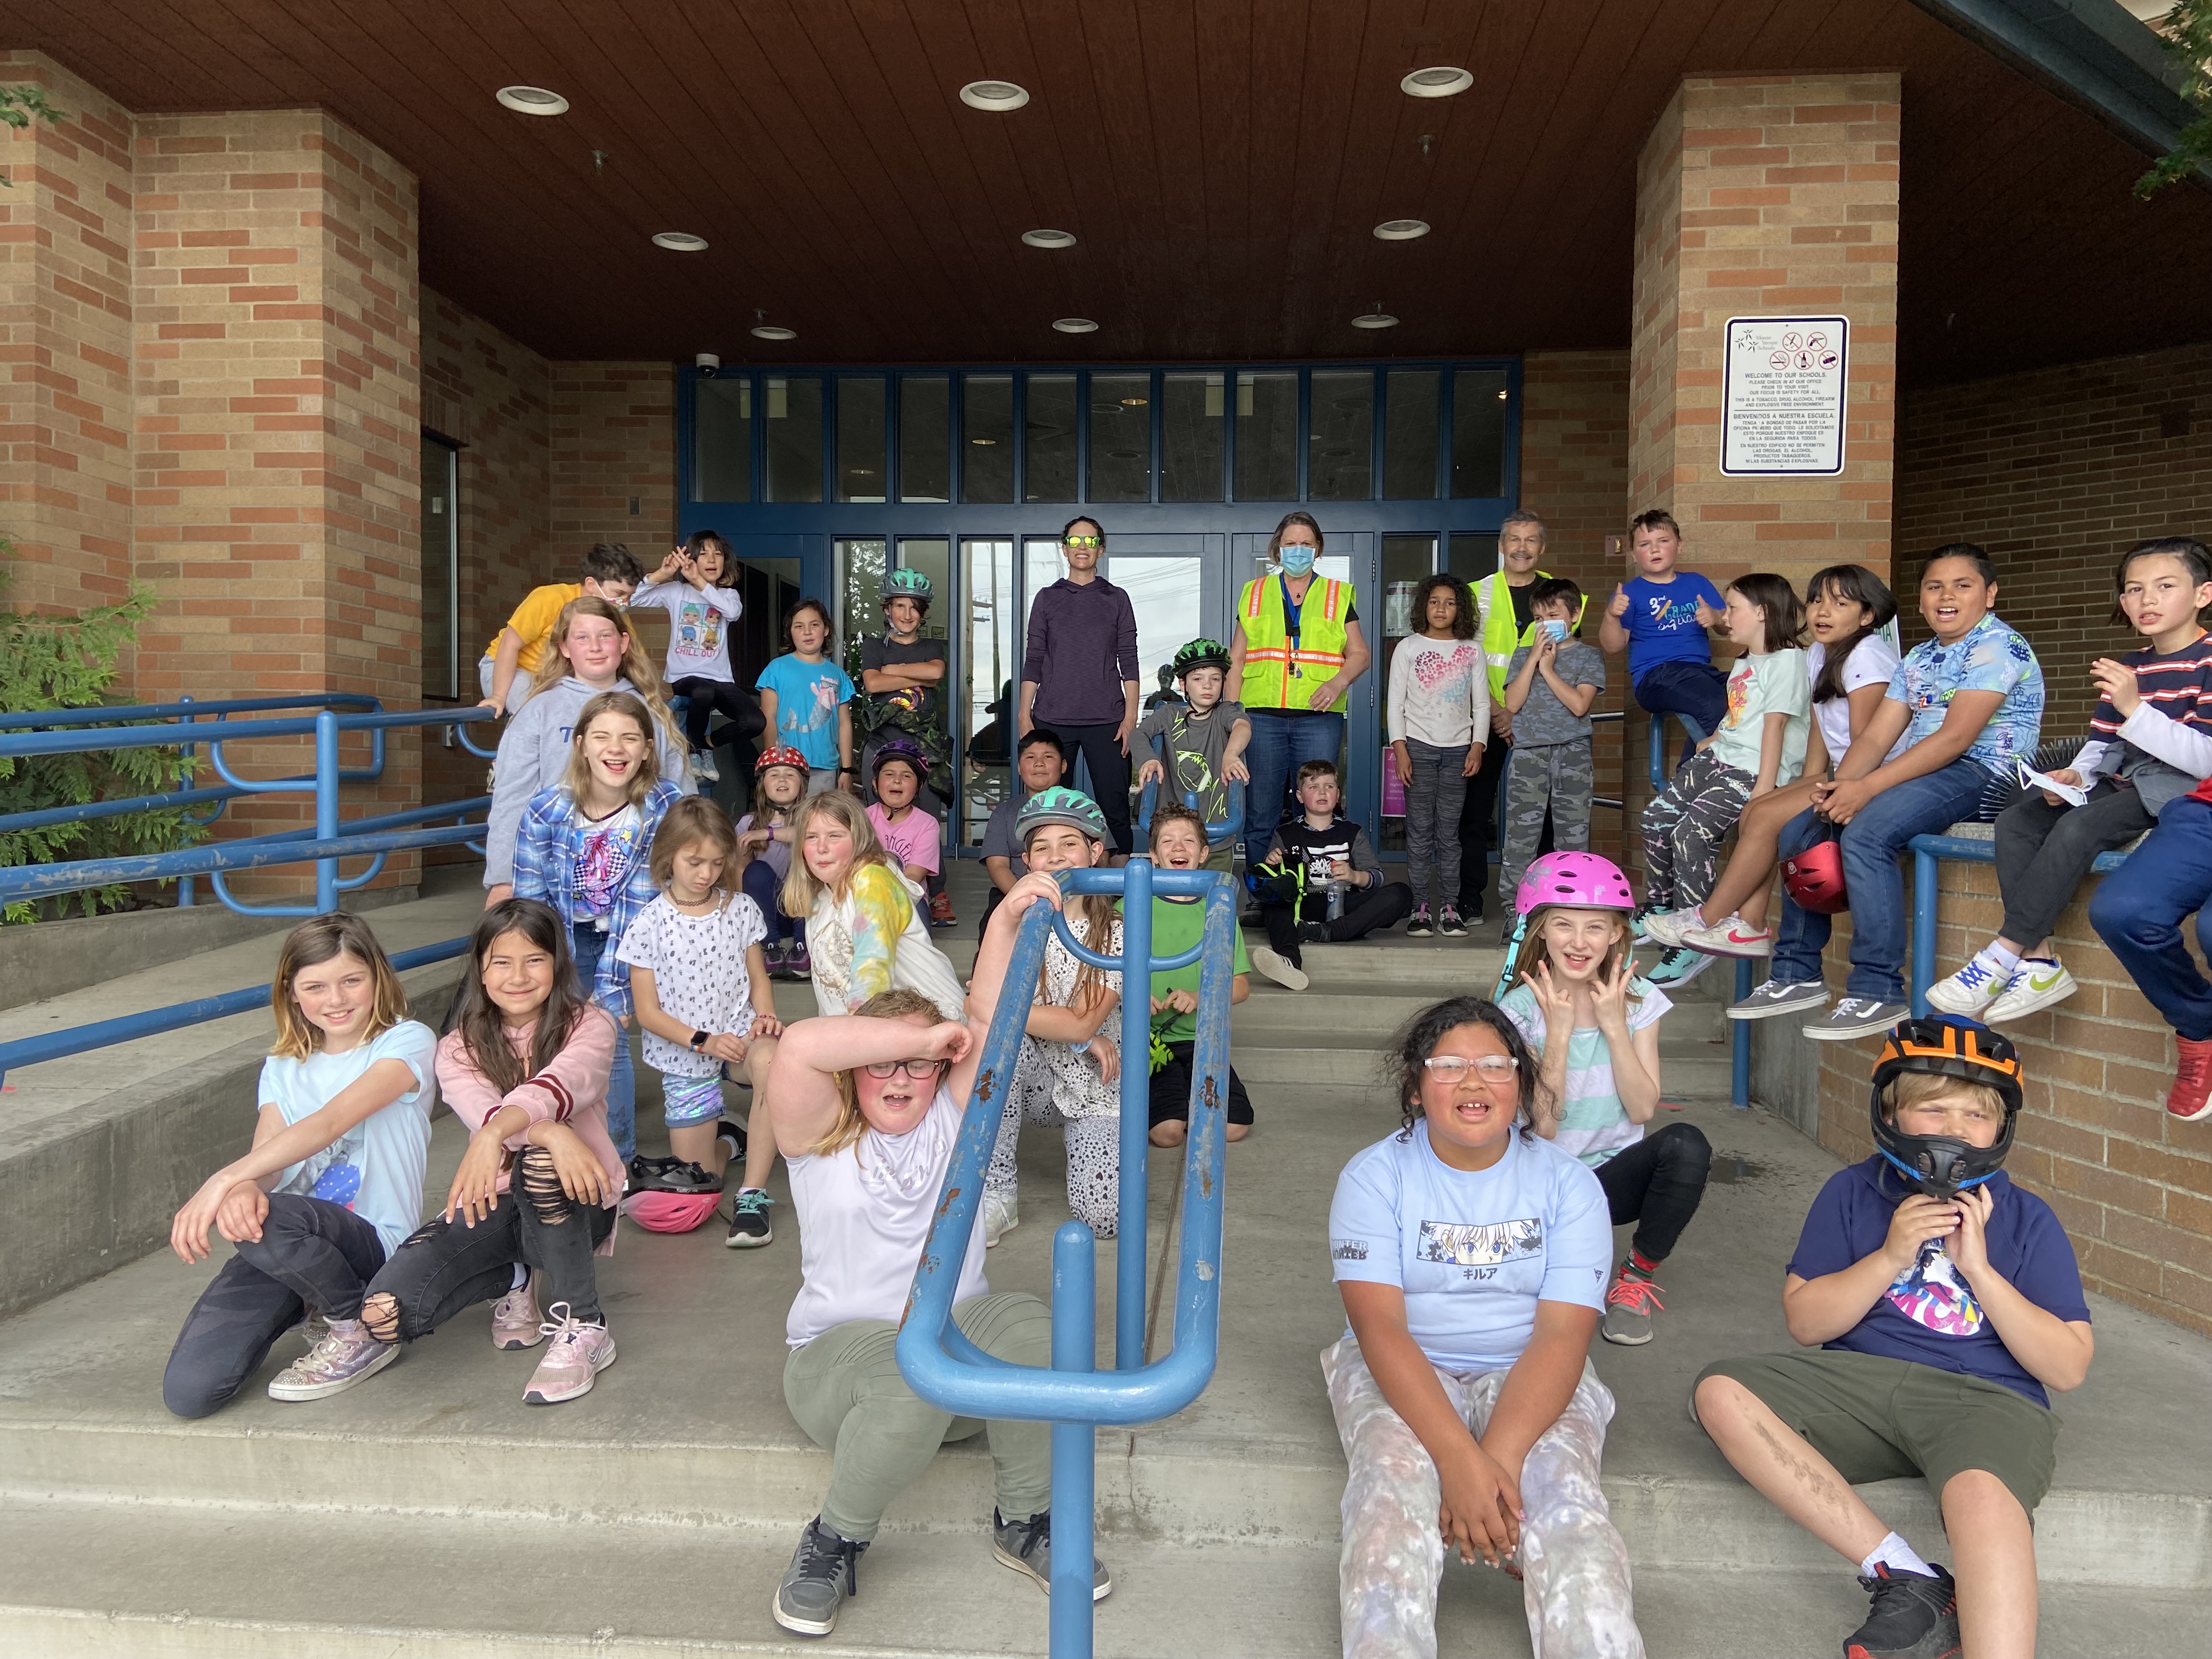 Group picture of Bike Club members on the steps of the school entrance.